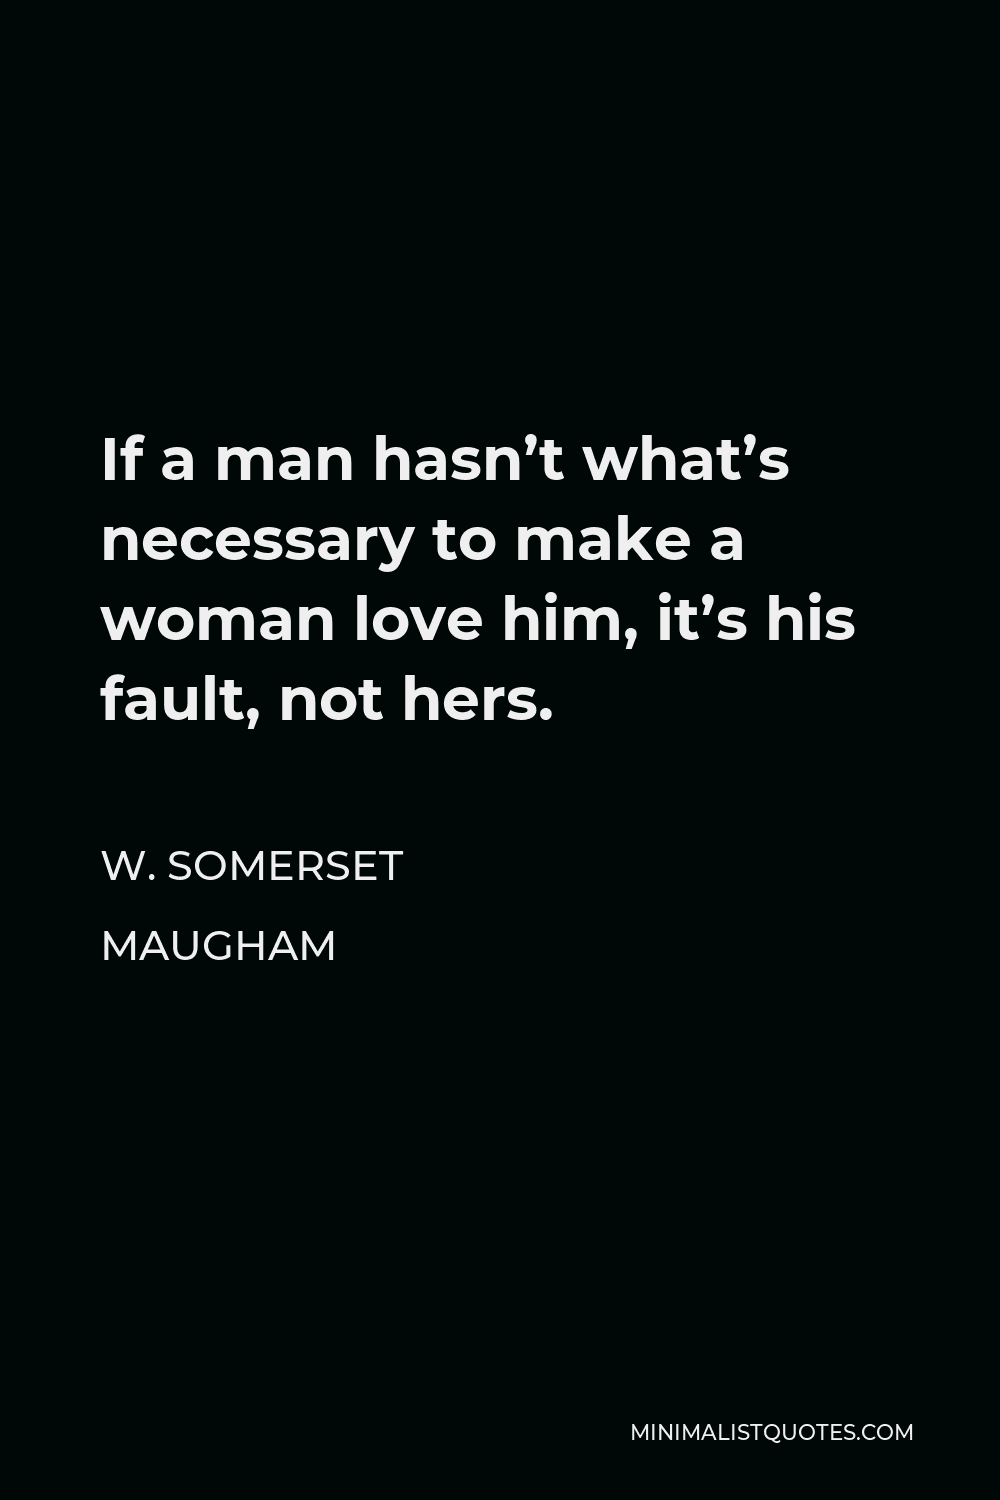 W. Somerset Maugham Quote - If a man hasn’t what’s necessary to make a woman love him, it’s his fault, not hers.